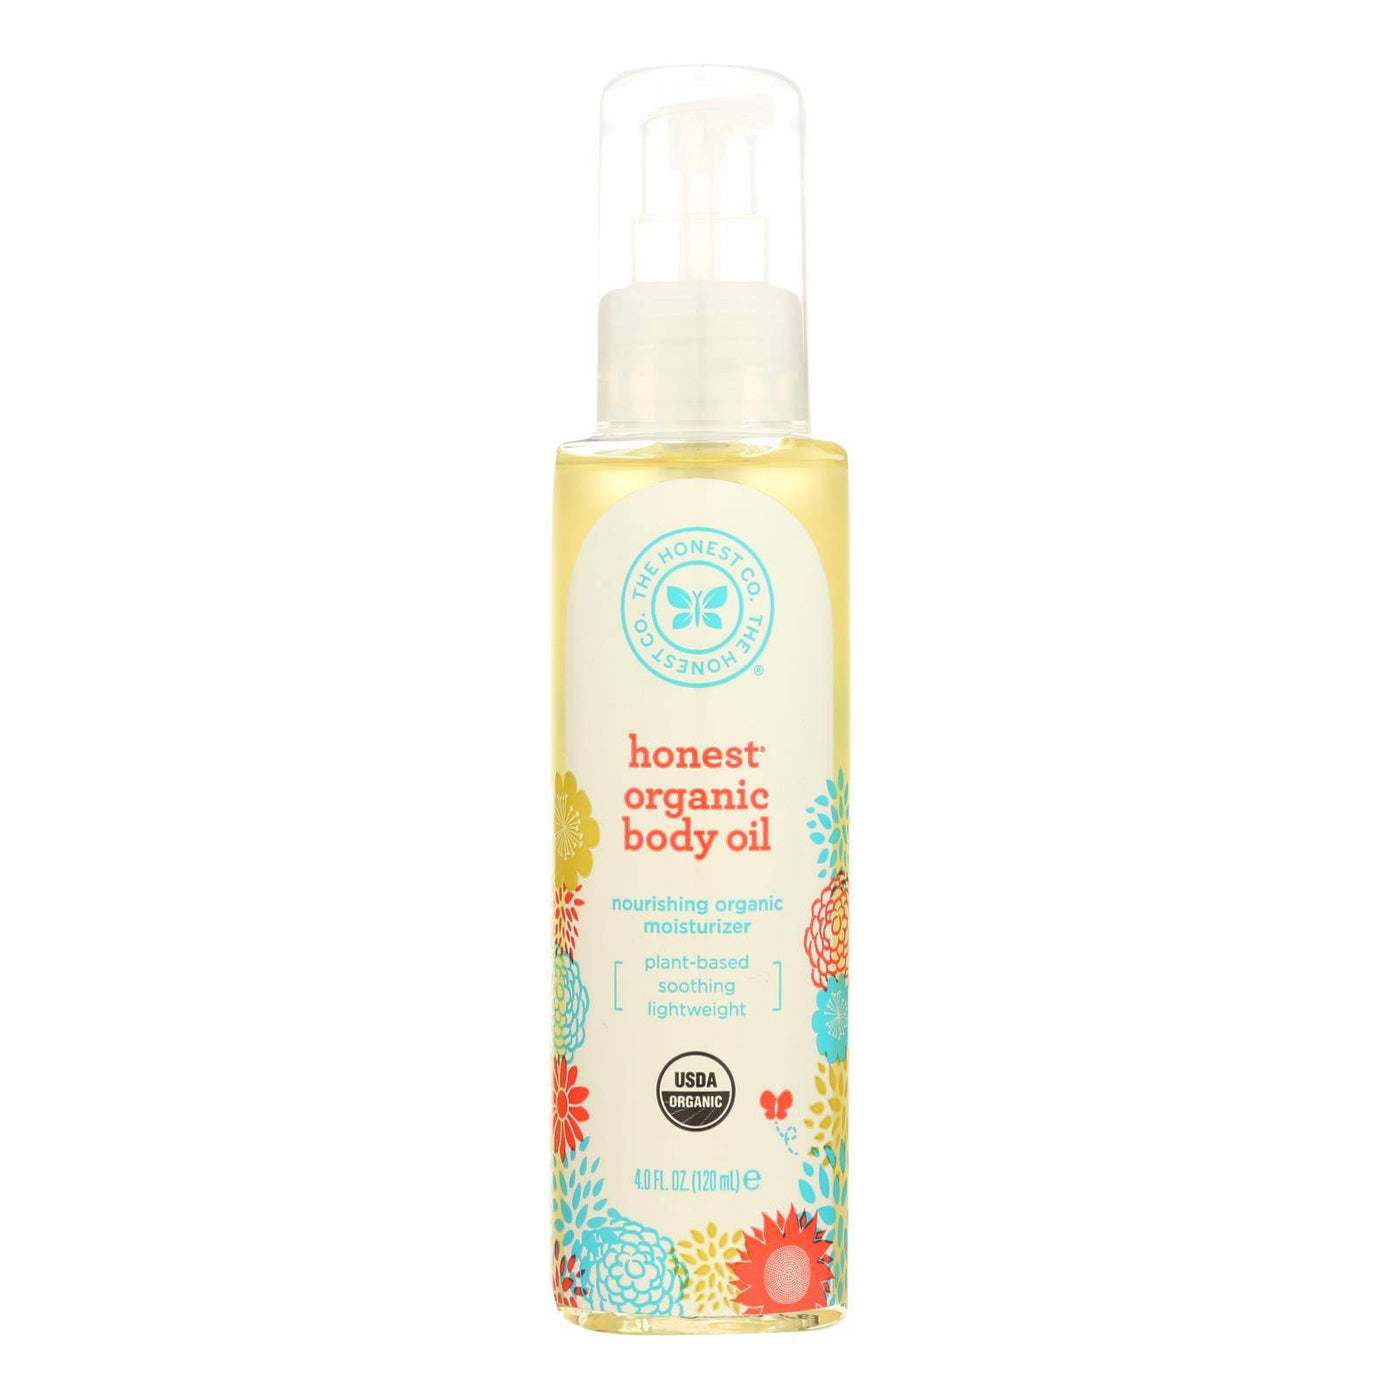 Buy The Honest Company Organic Body Oil - 4 Oz  at OnlyNaturals.us